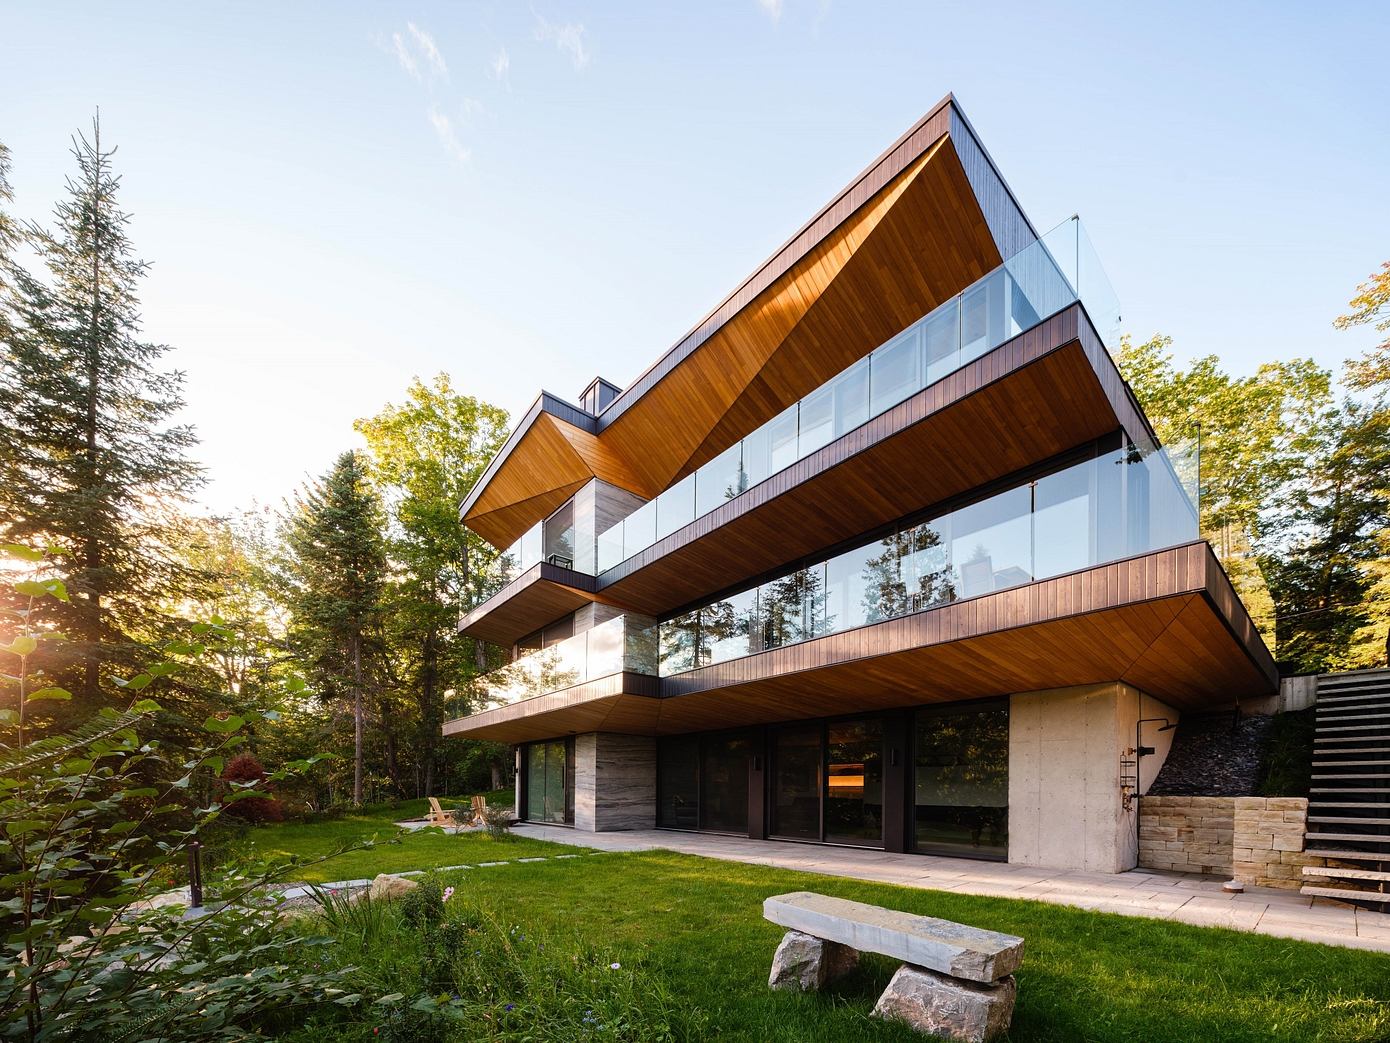 The Break Residence: A House with Two Faces in Canada